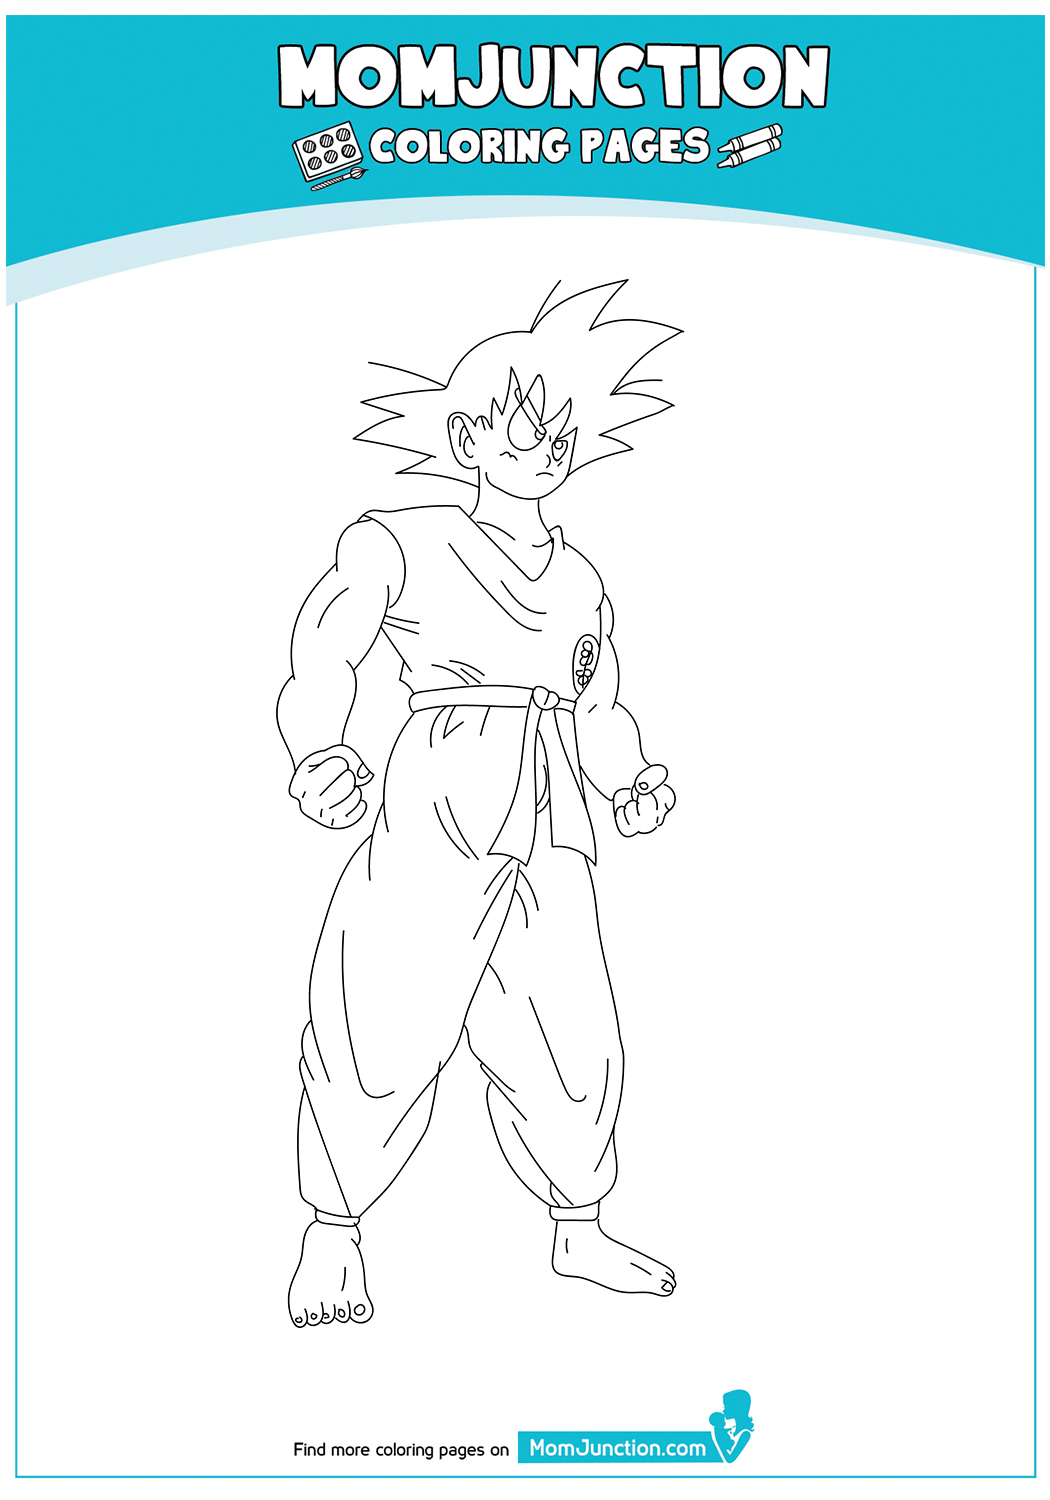 Character-Name-Gohan-from-Dragon-Ball-Z-Picture-Coloring-Page-17